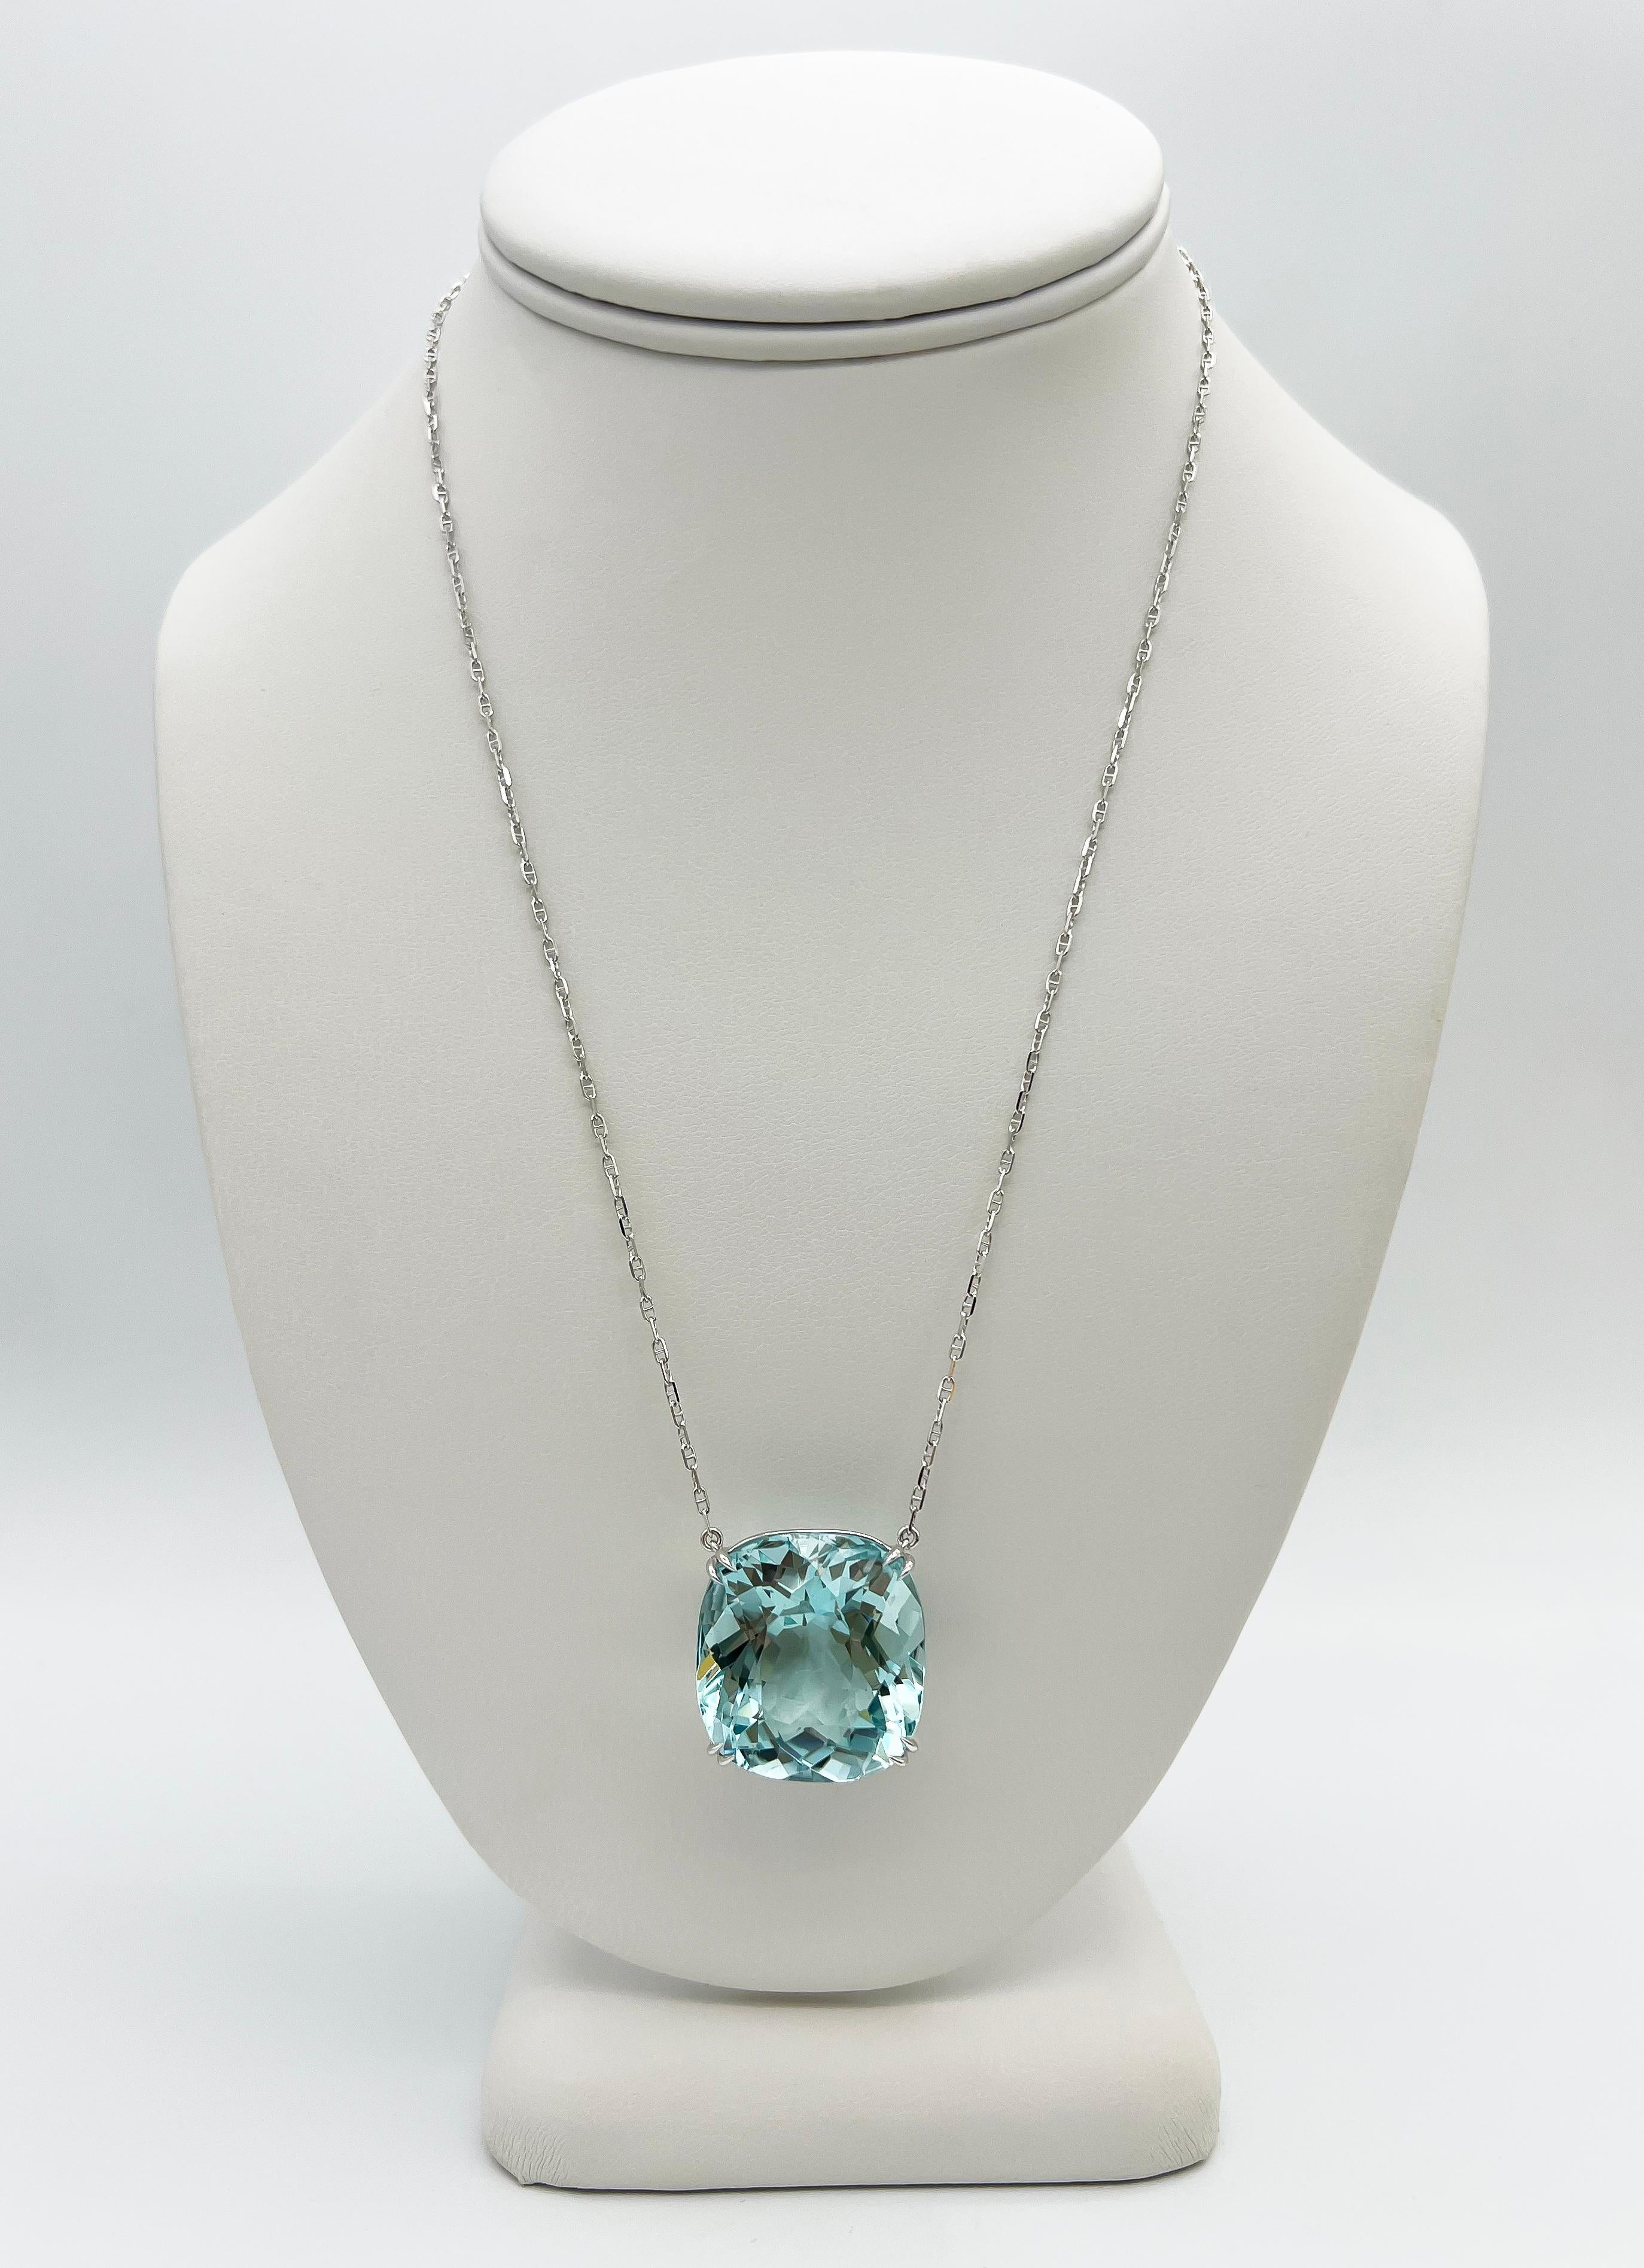 Splendid 48.46 Carat Cushion Cut Aquamarine Pendant in a 14 Karat White Gold Chain, GIA

This Aquamarine necklace will take everyone’s breath away. It boasts a single, wholesome 48.46 Carat of top-notch quality aquamarine stone Prong-set and